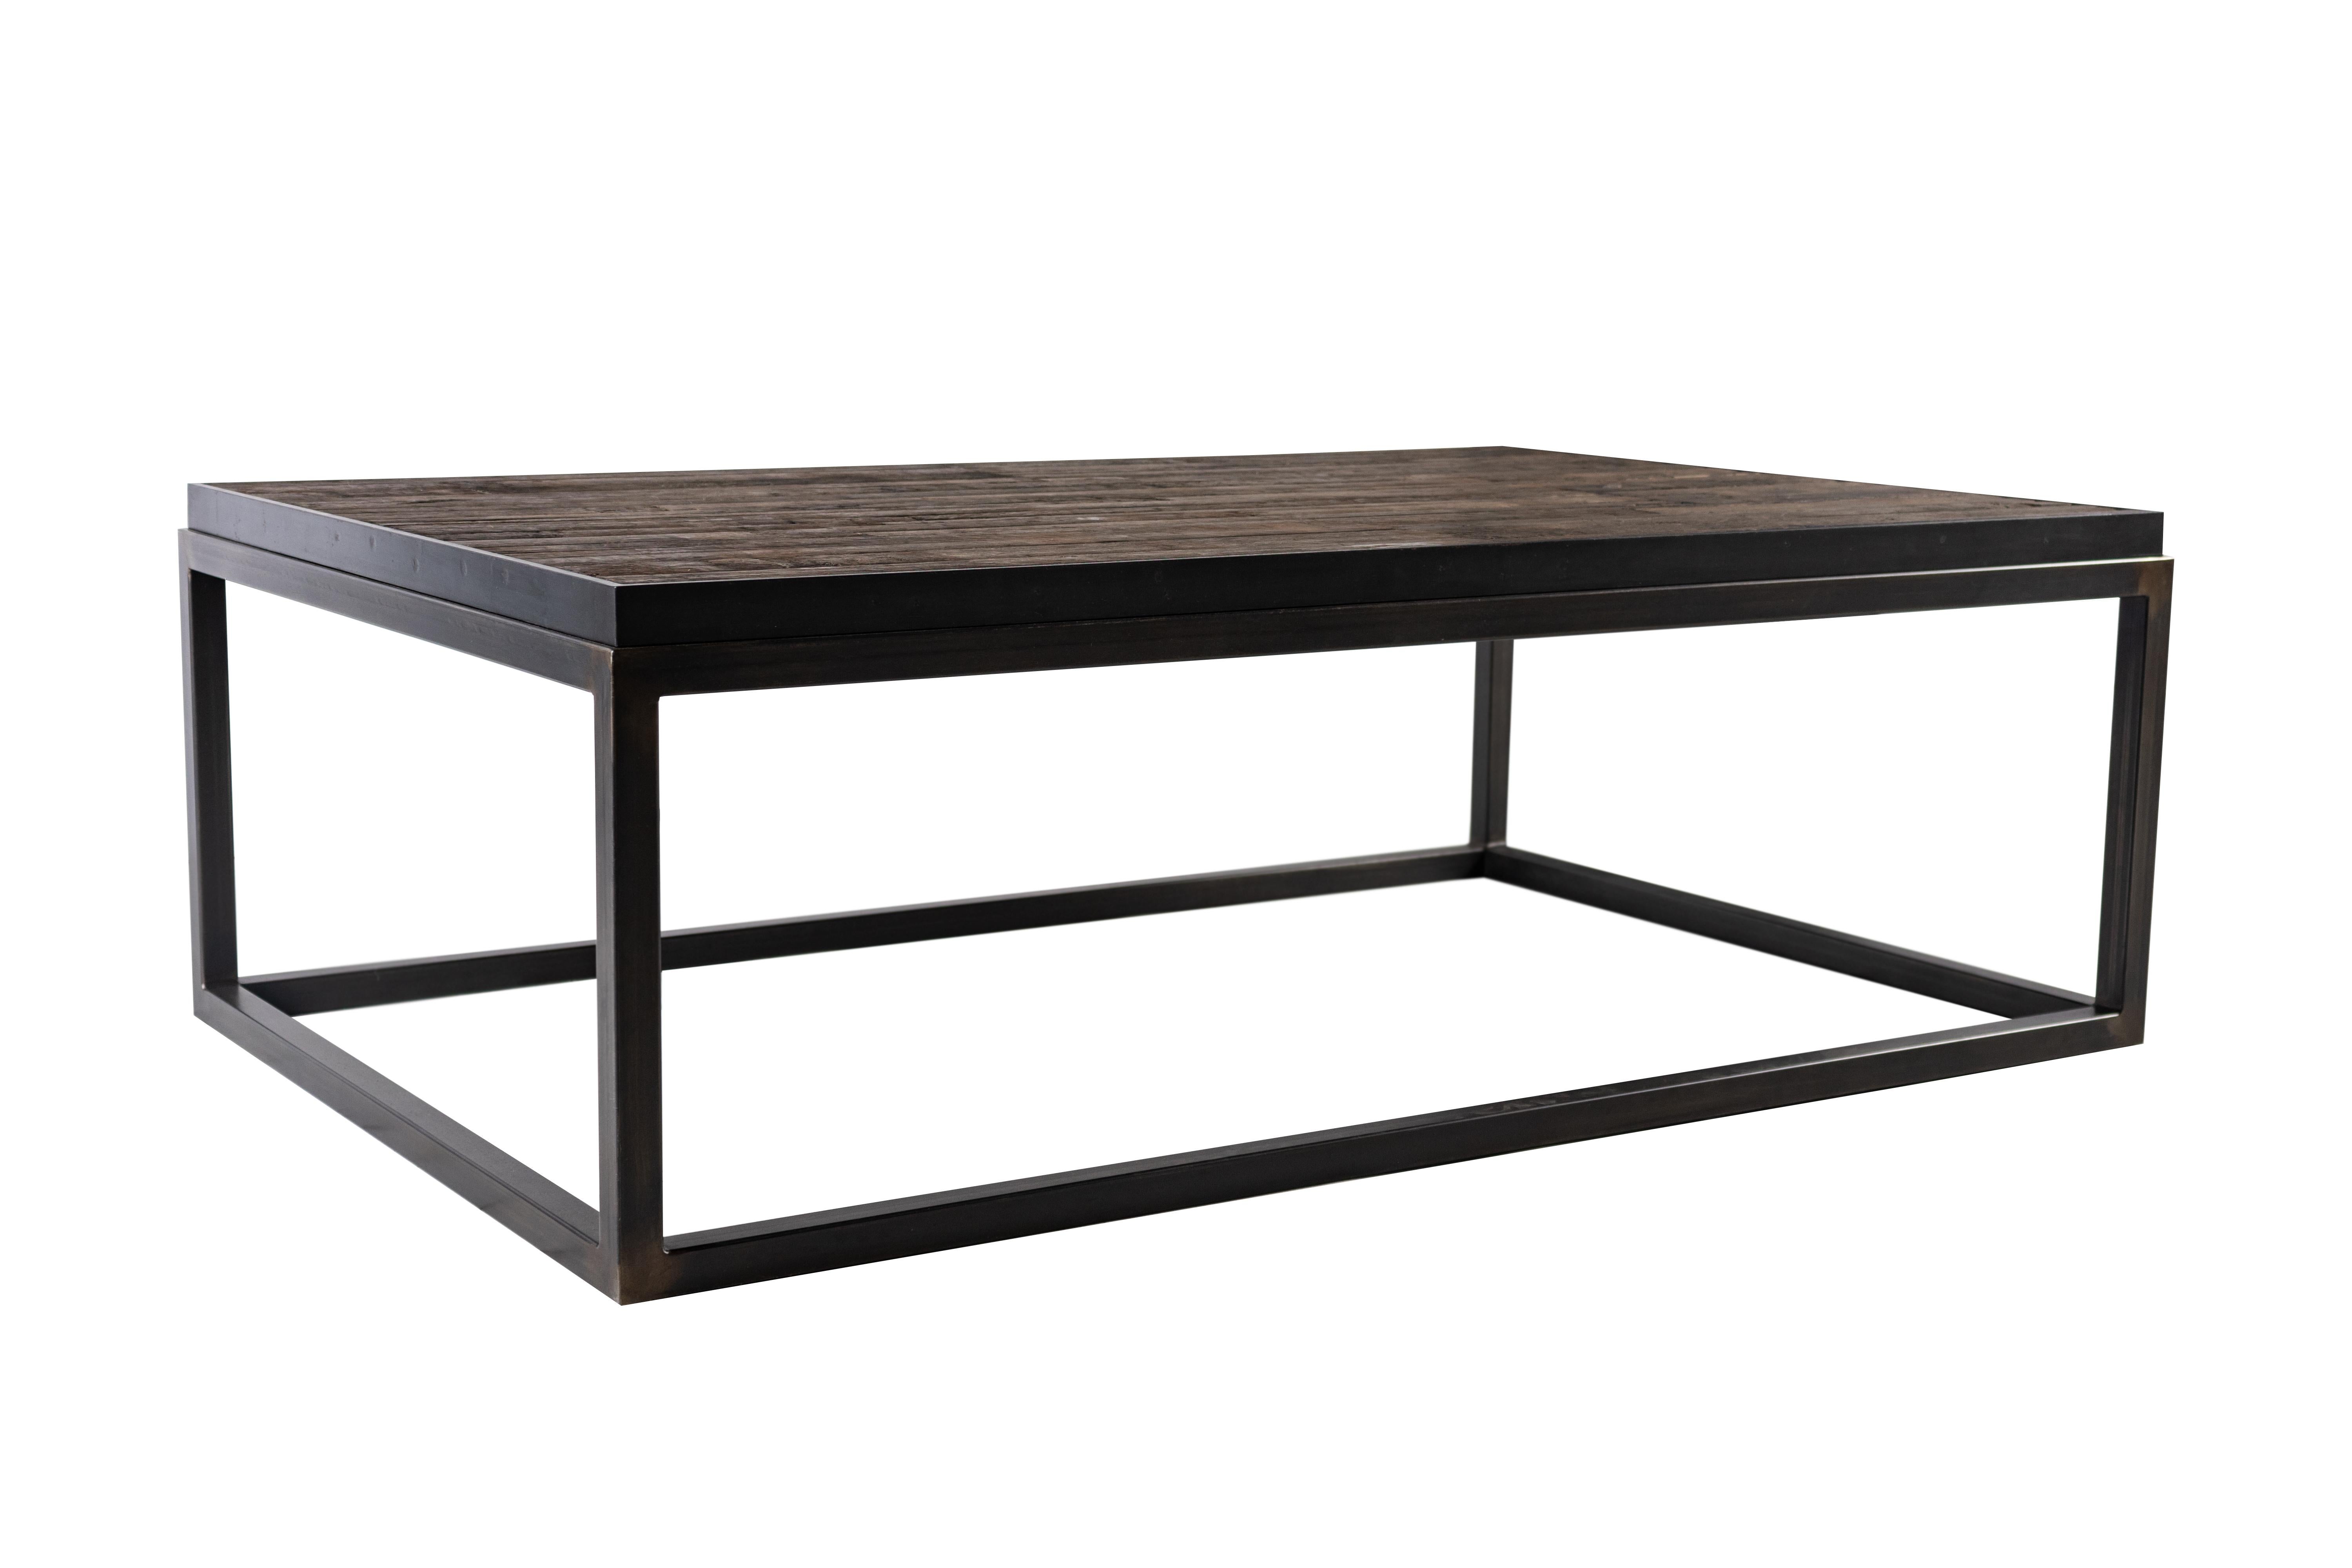 Coffee table with top crafter from reclaimed oak and ebony patina steel base.

Piece from our one of a kind collection, Le Monde. Exclusive to Brendan Bass.
    